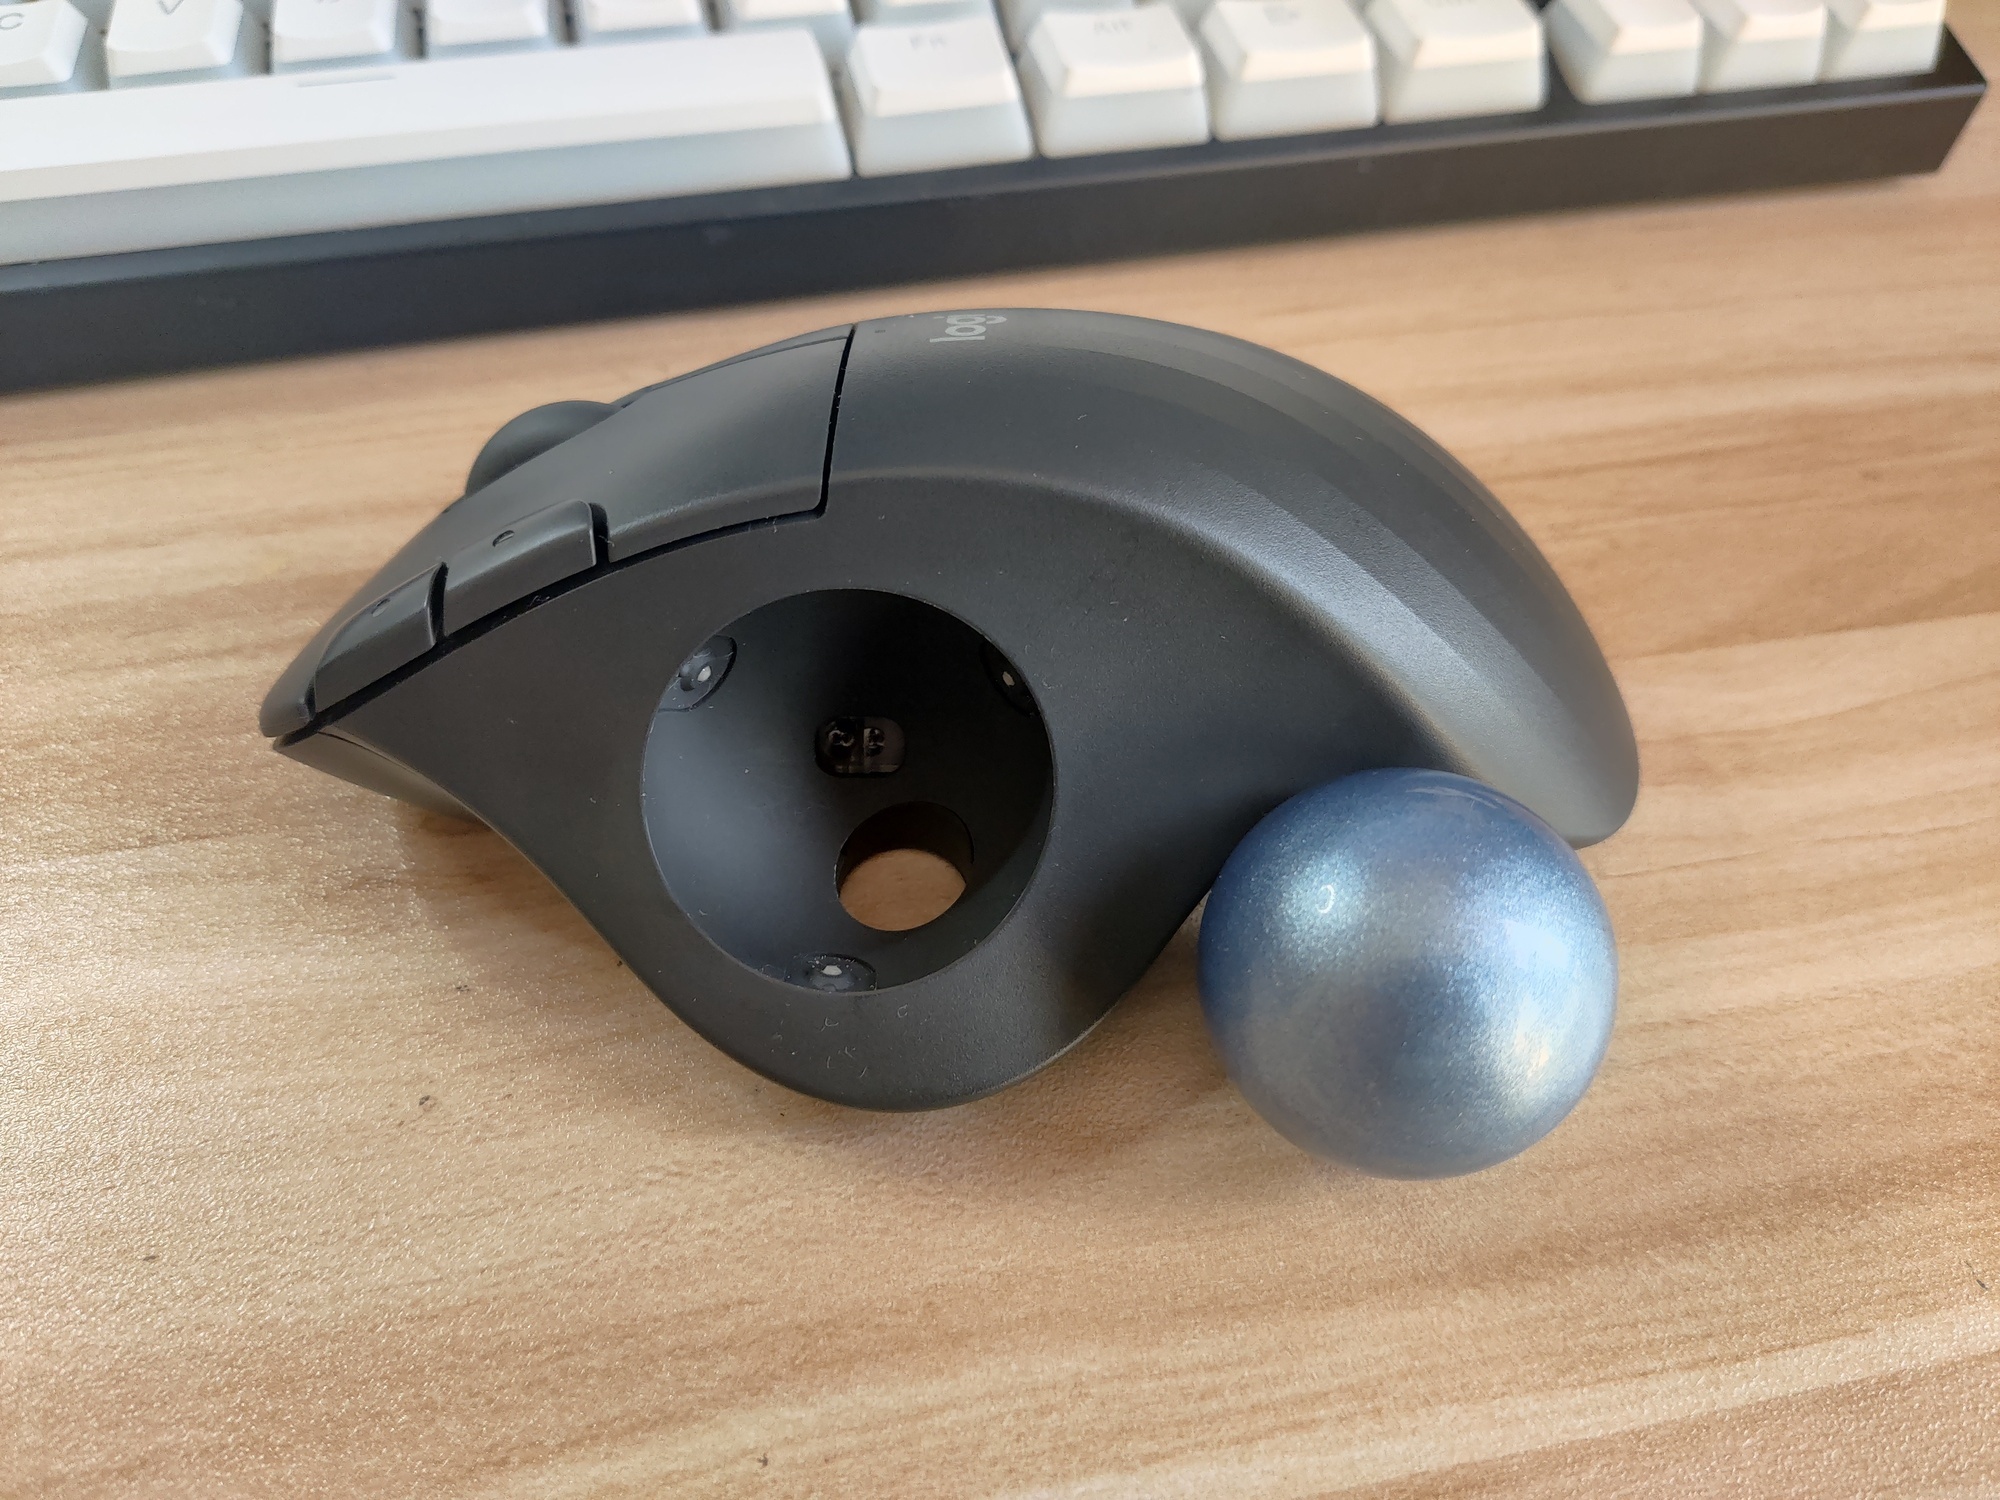 Left view after taking out the trackball. The ball leans against the
chassis and looks glittery.